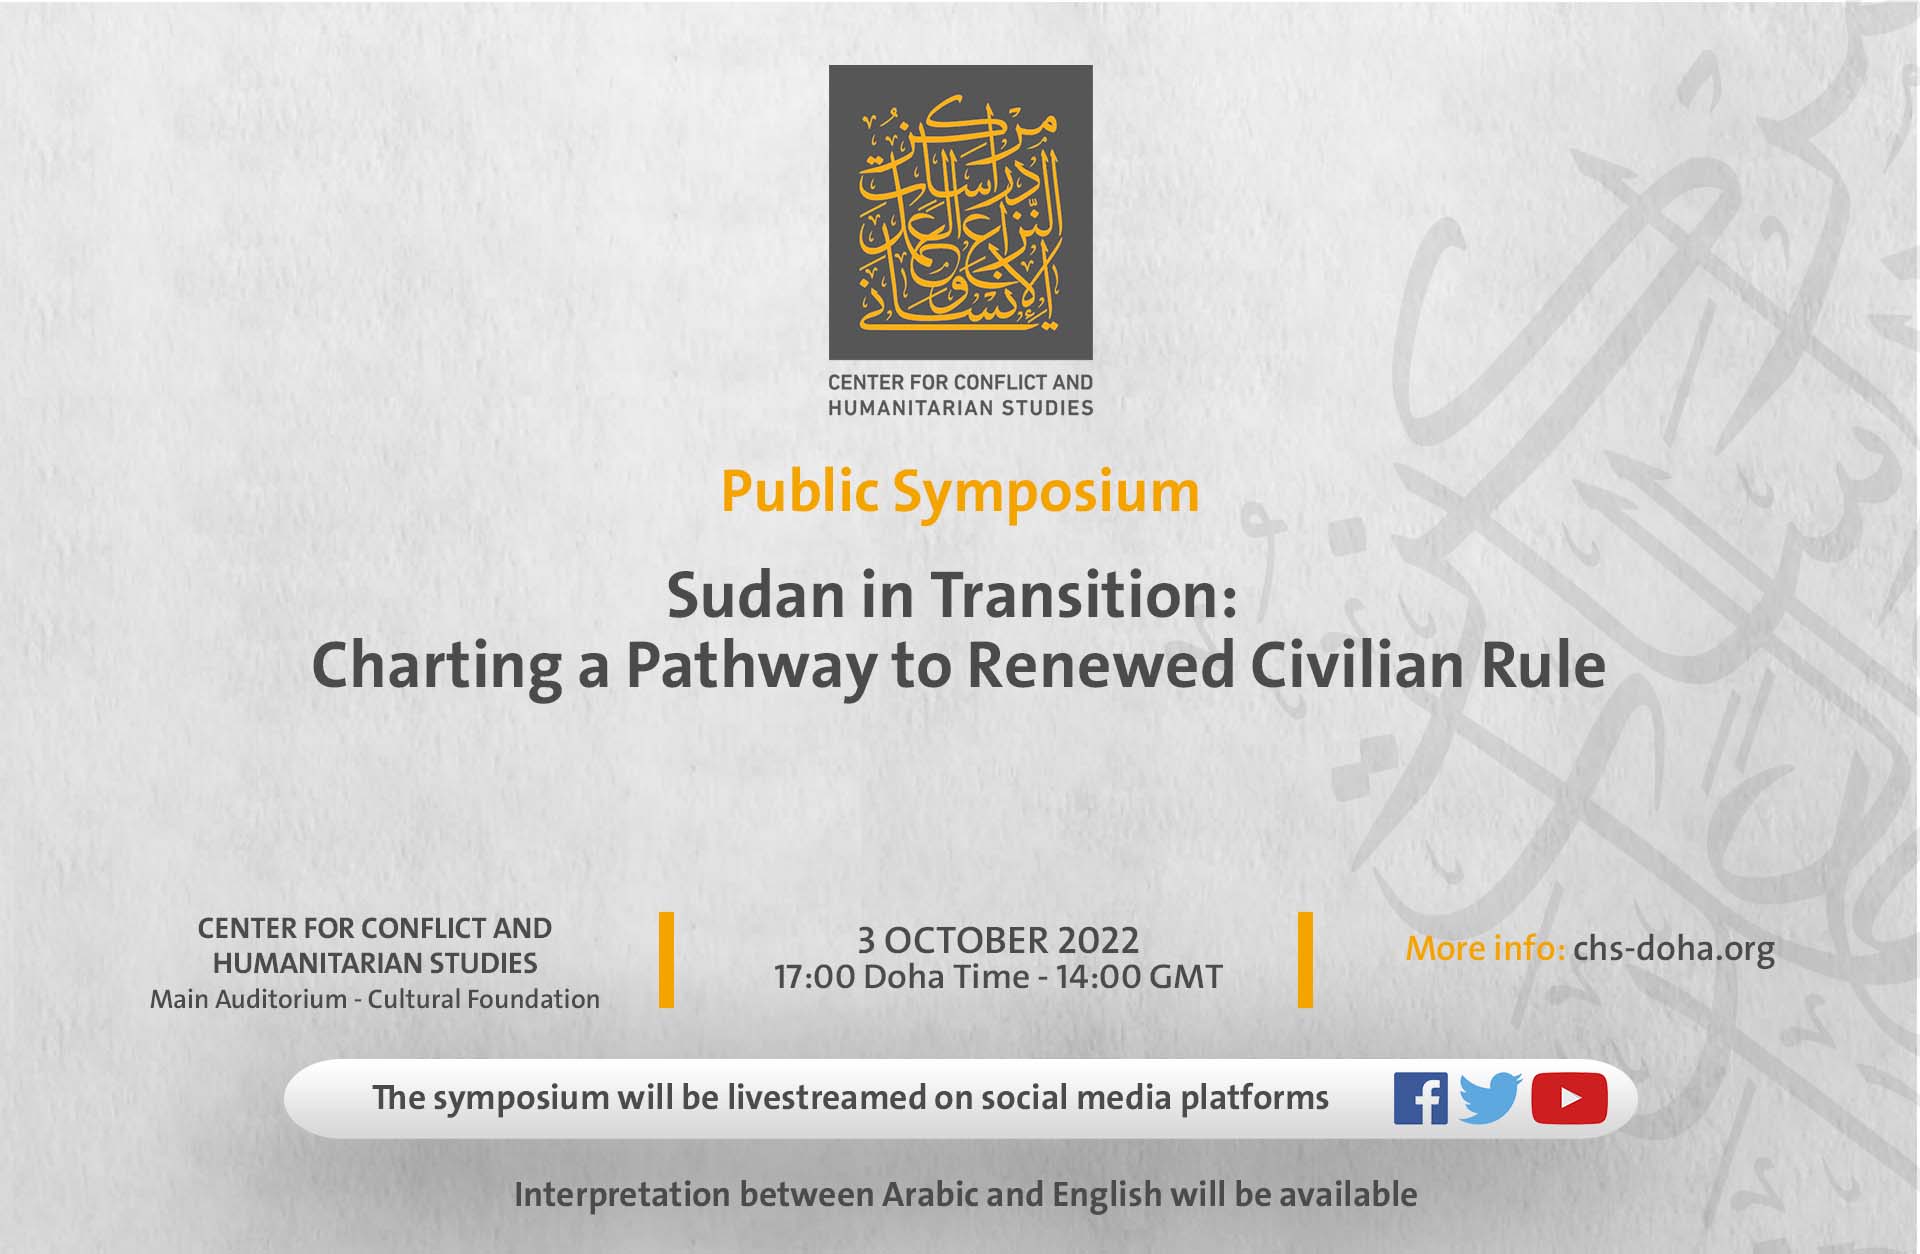 Sudan in Transition: Charting a Pathway to Renewed Civilian Rule